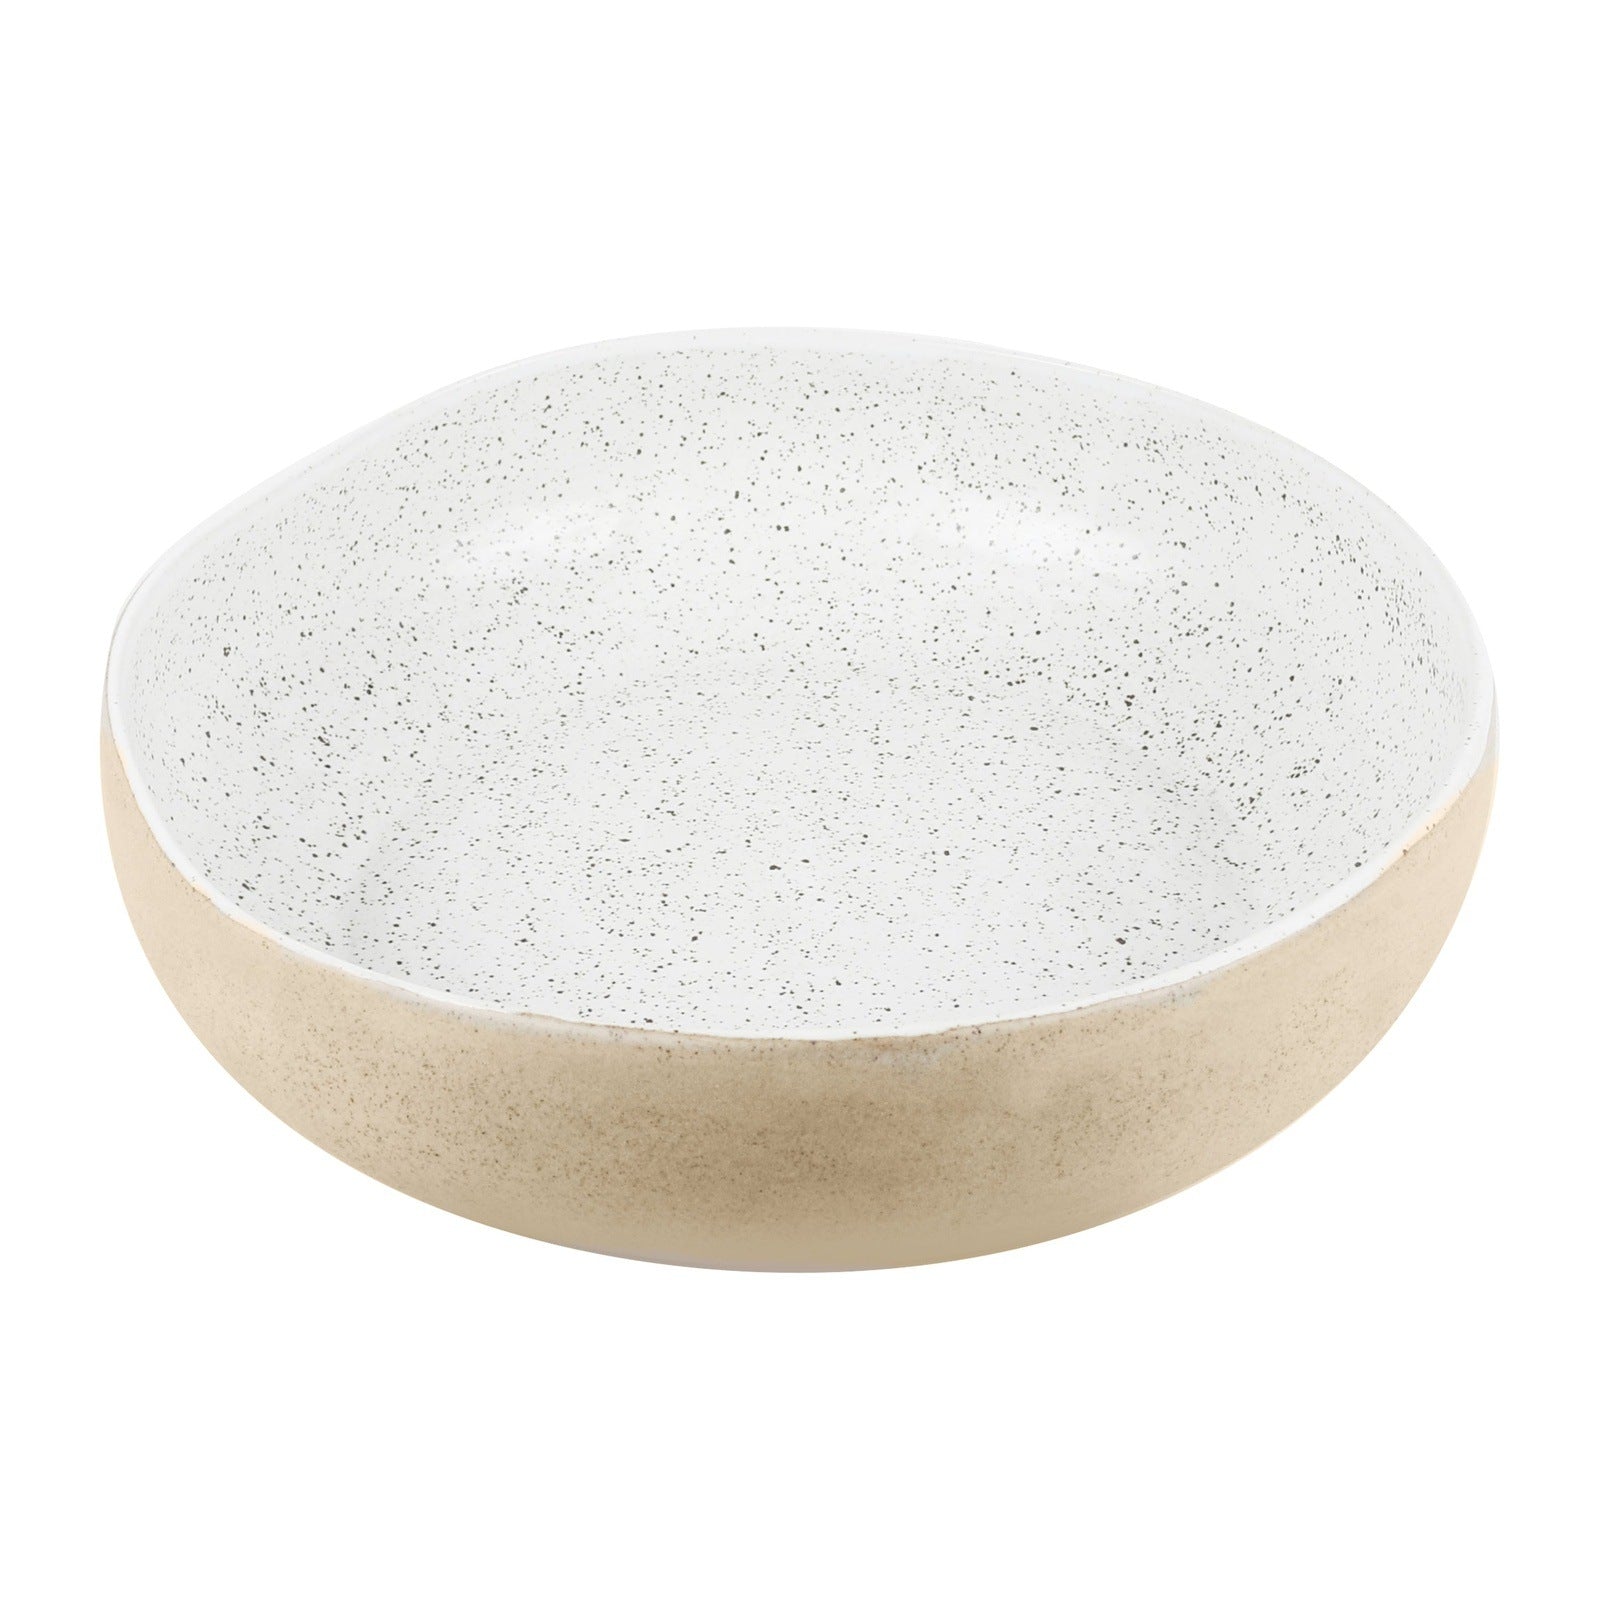 Garden to Table Large Salad Bowl